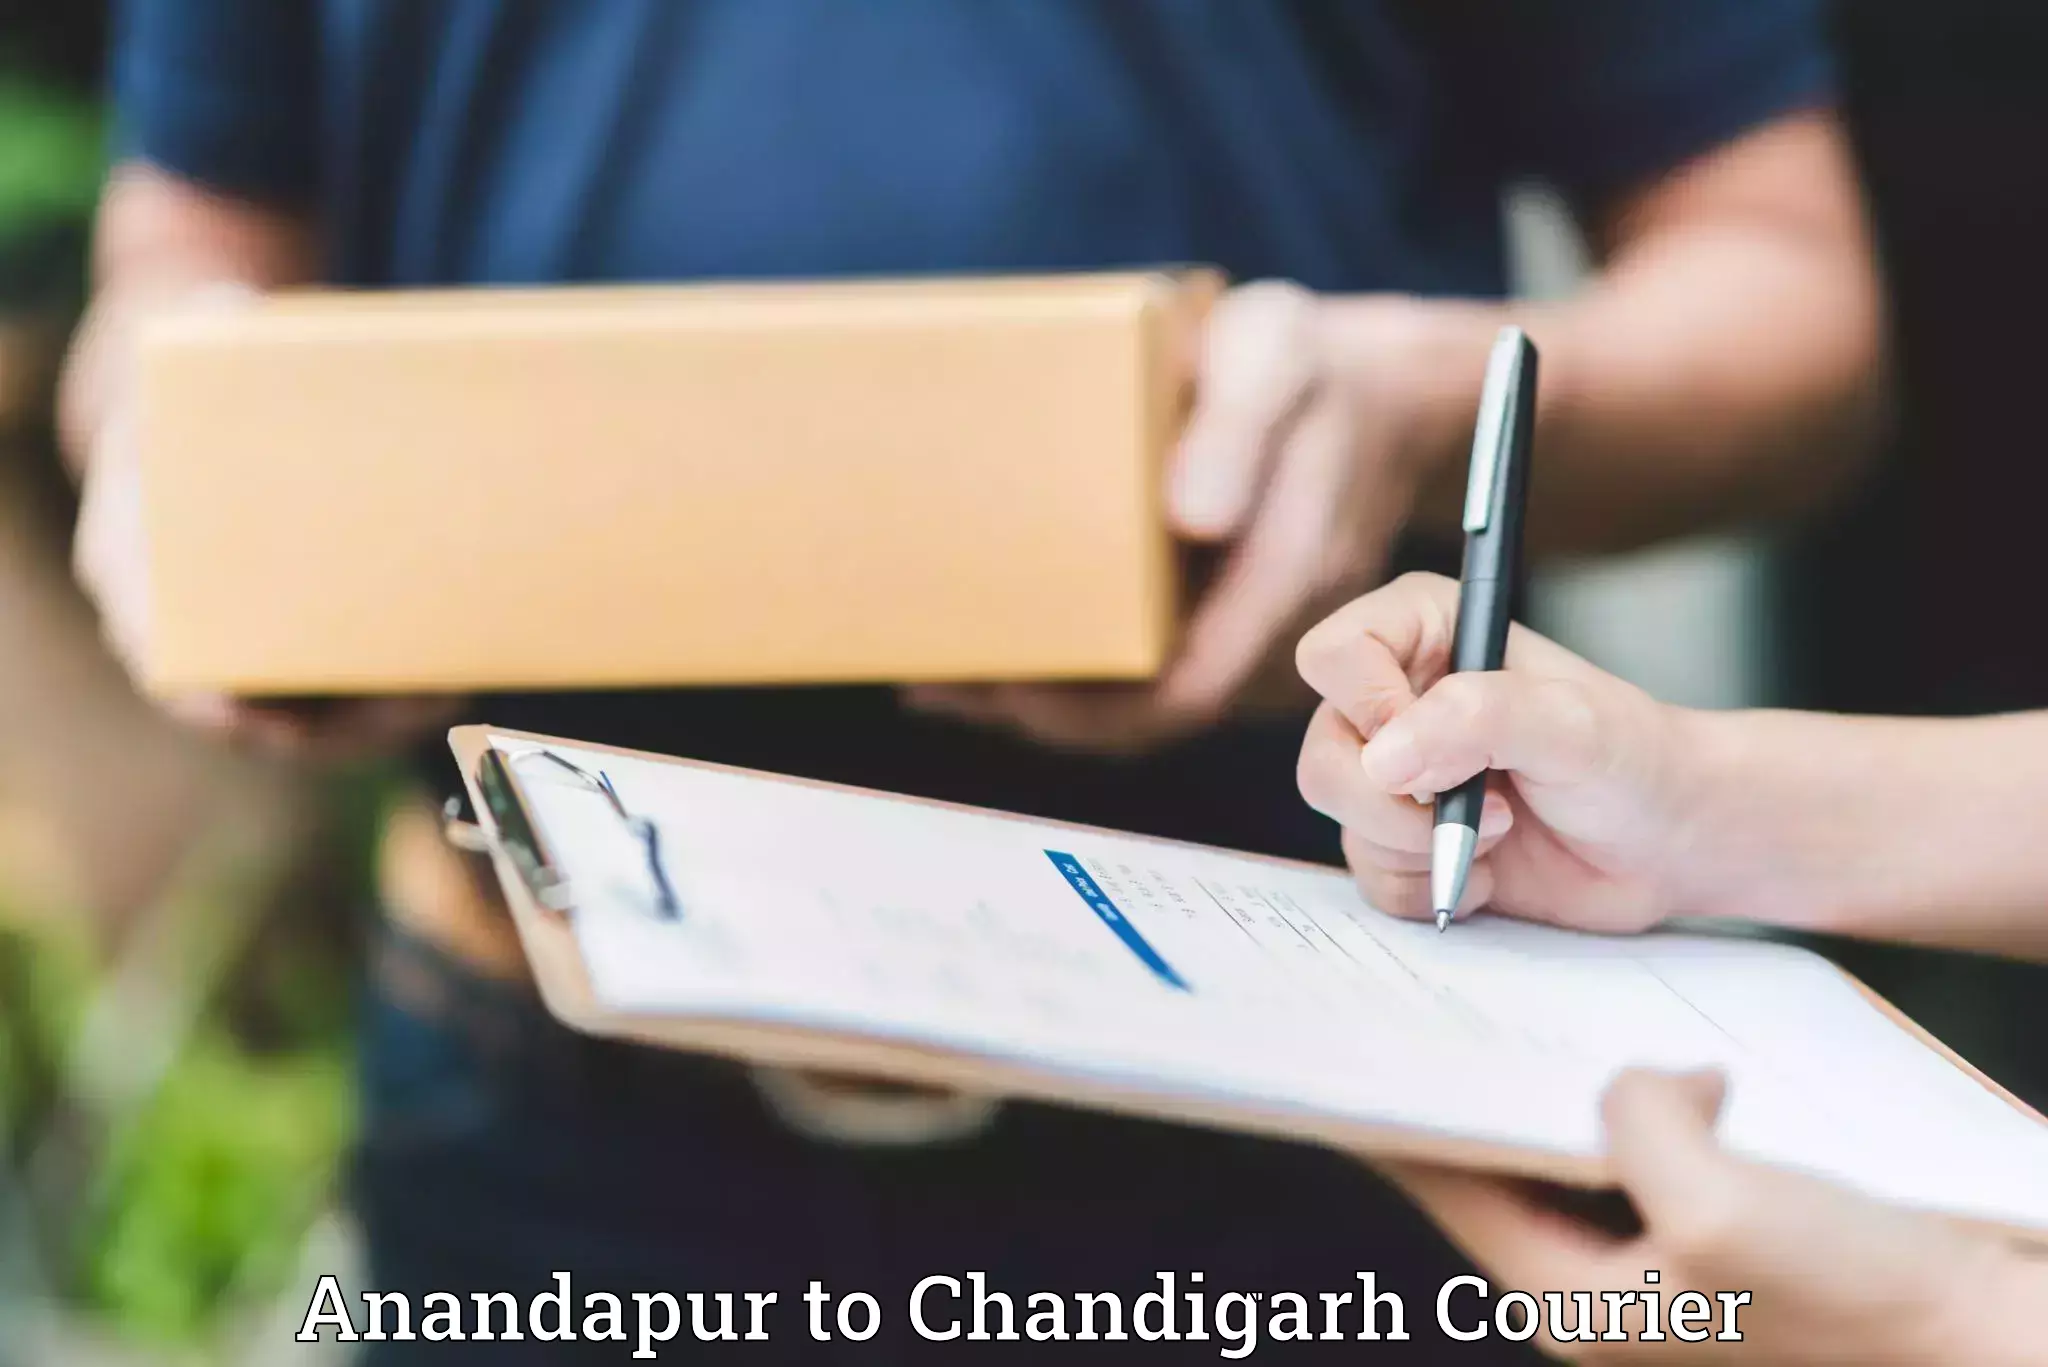 Comprehensive relocation services Anandapur to Chandigarh